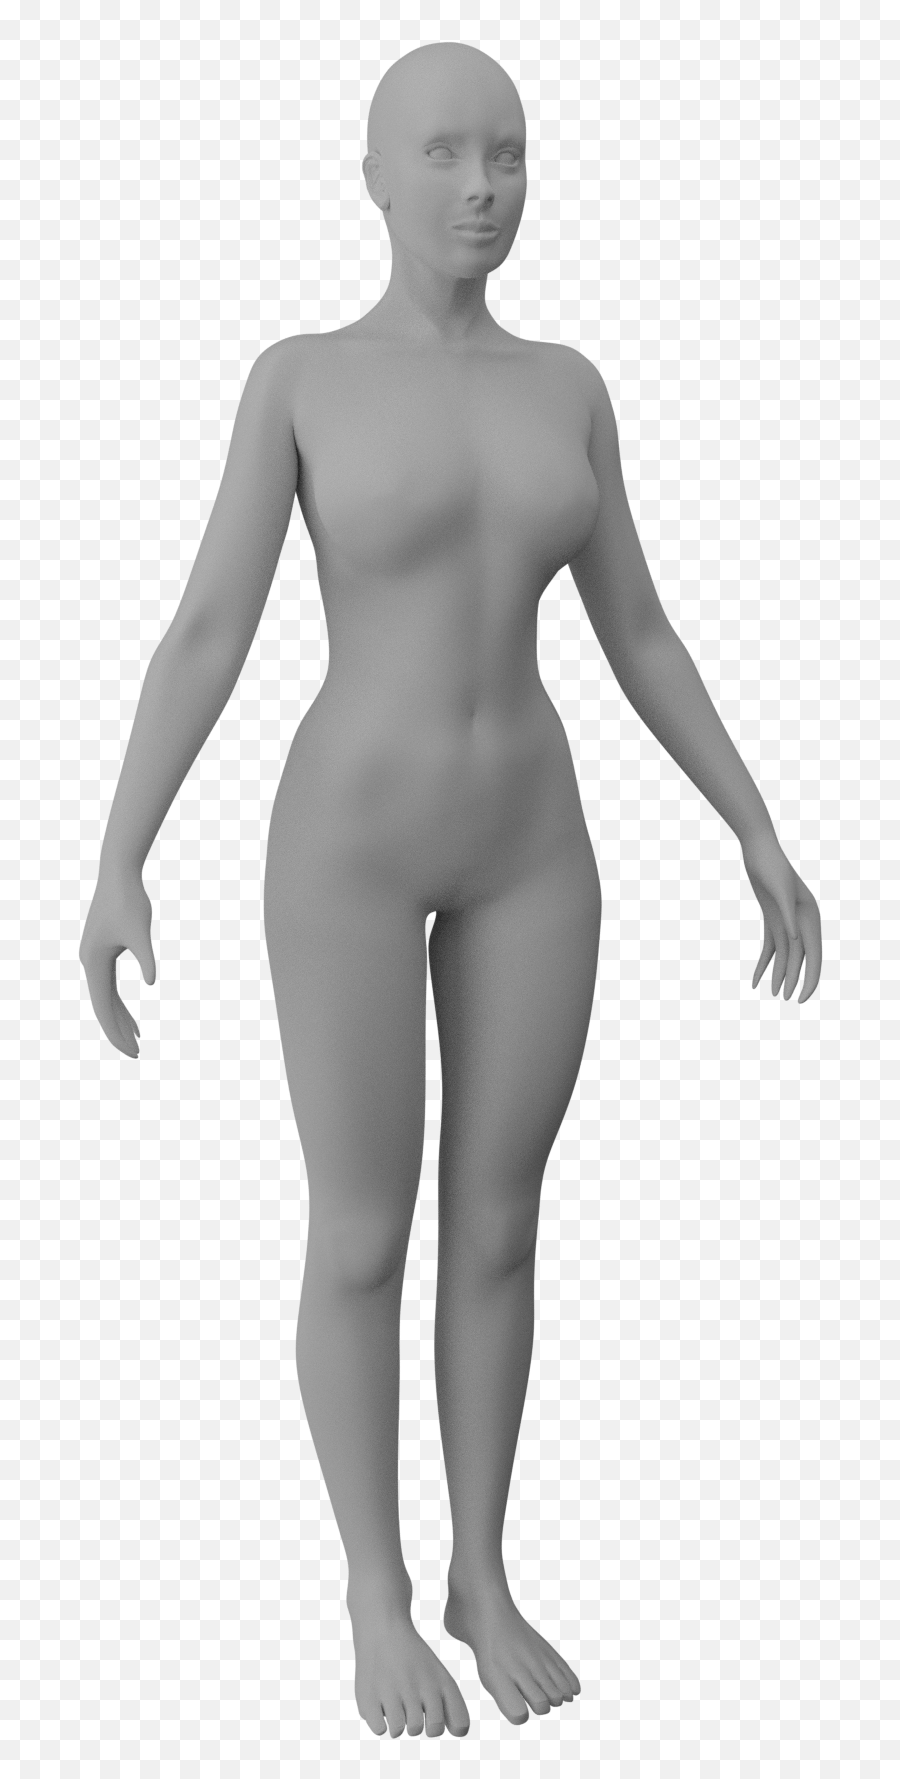 File201802 Human Femalepng - Wikimedia Commons Standing,Woman Standing Png